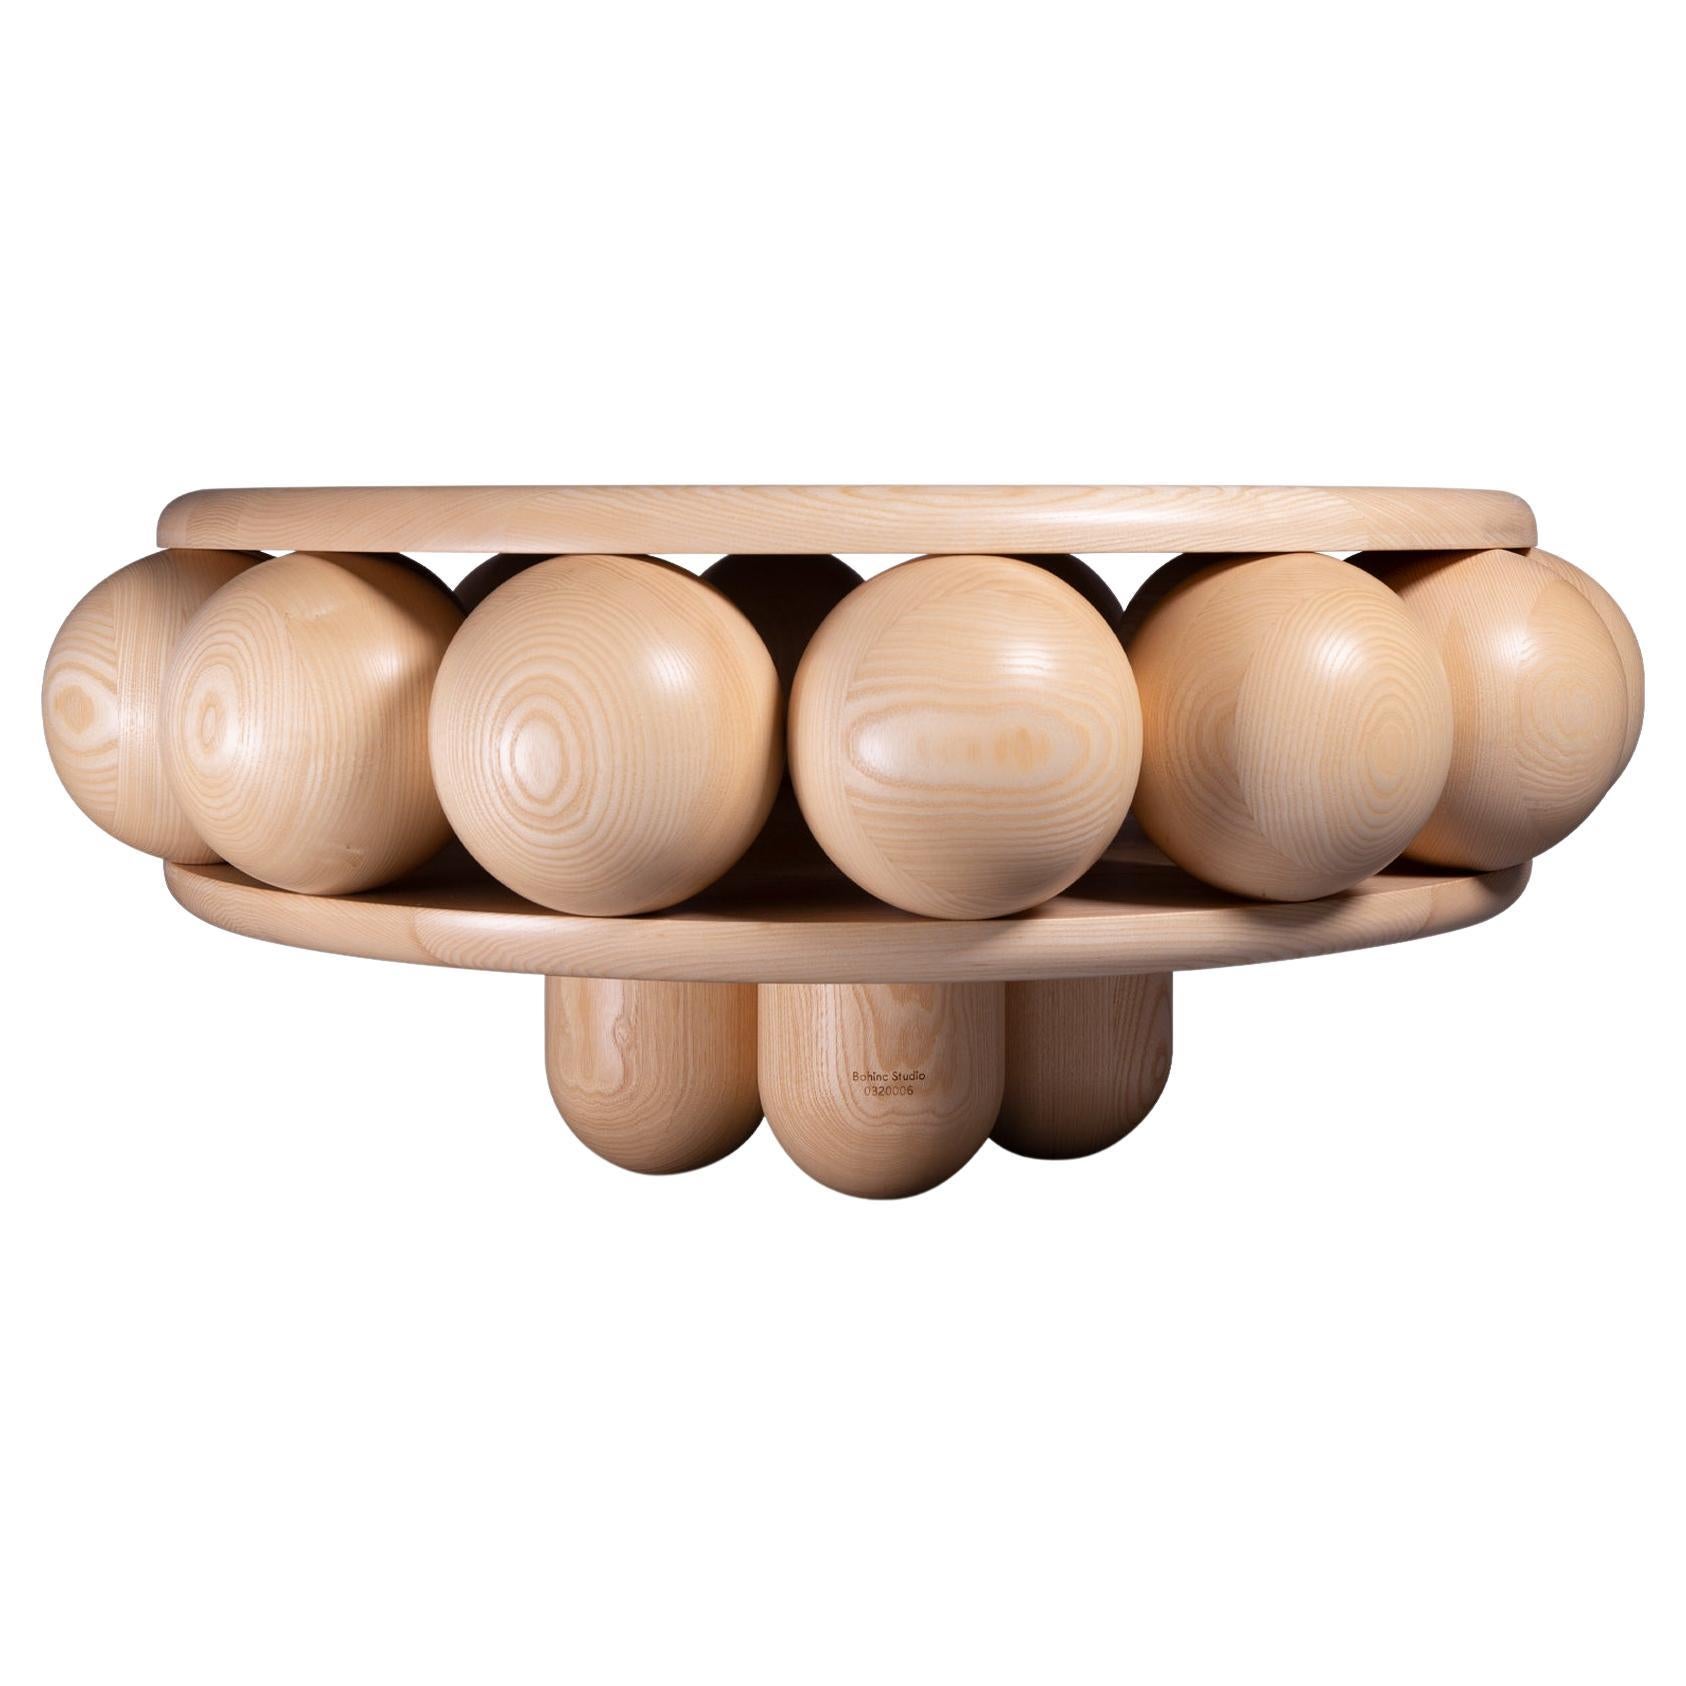 Macaroon Coffee Table by Lara Bohinc in Natural Finish Wood, in Stock For Sale